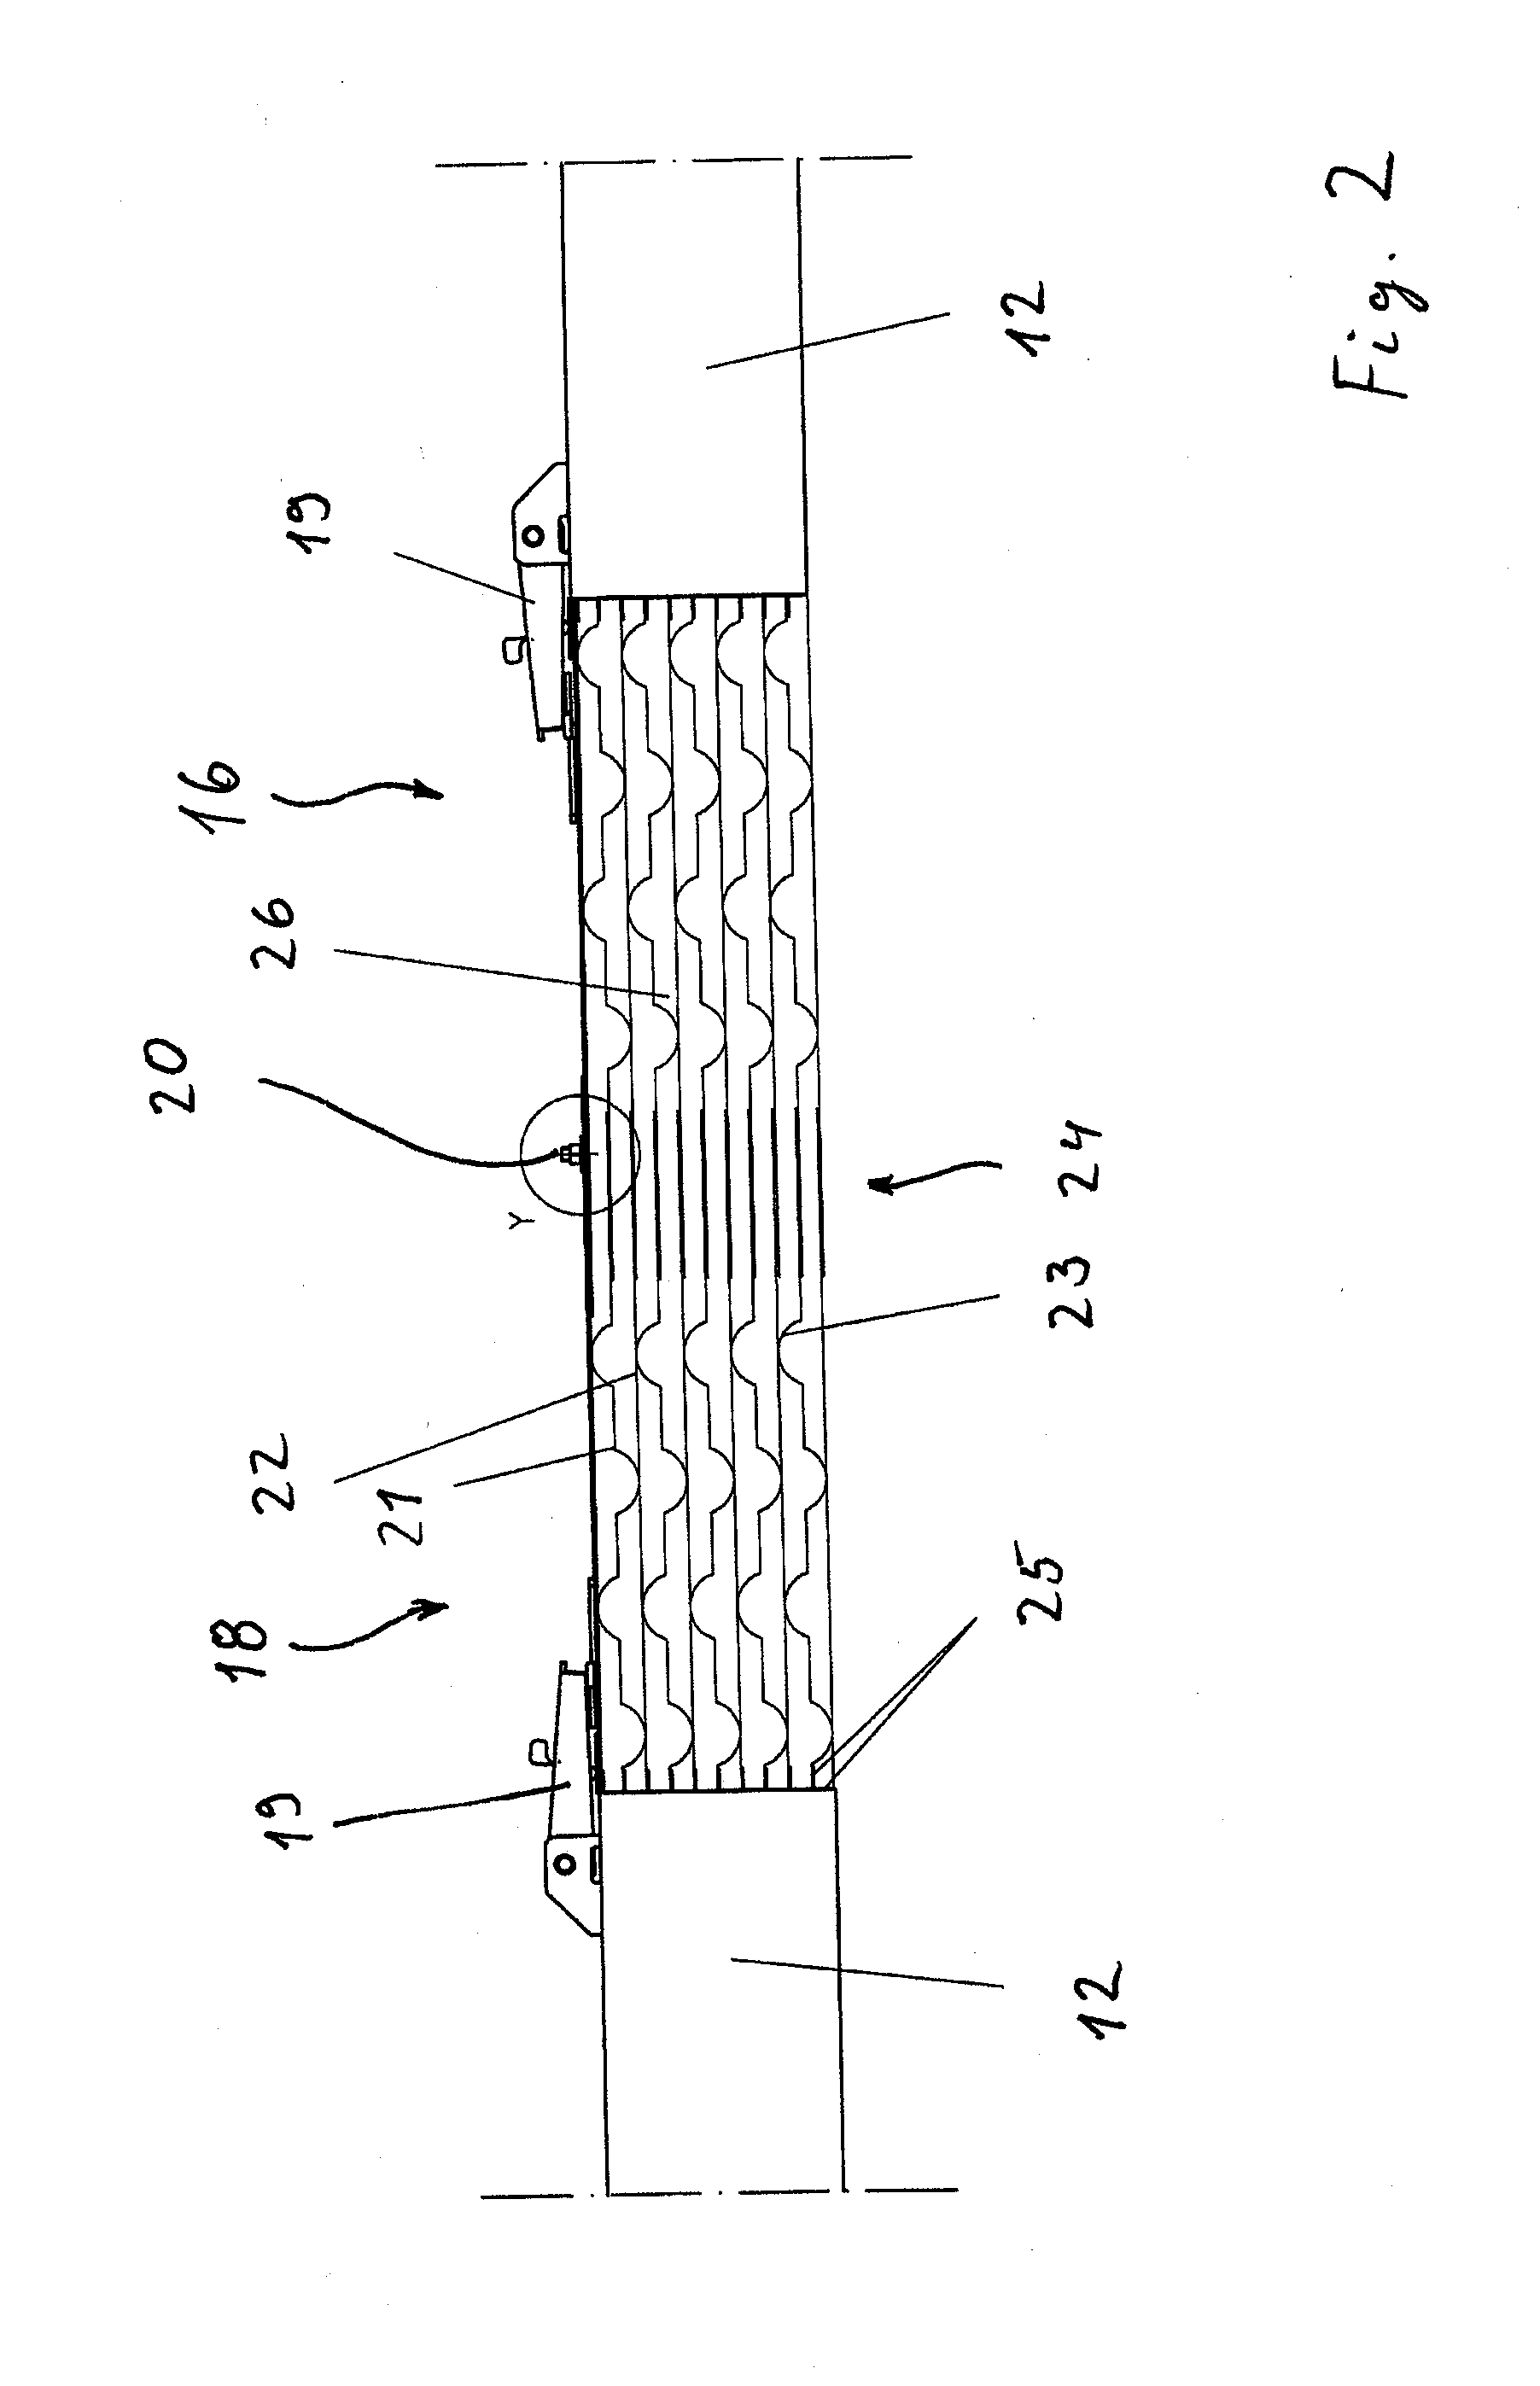 Insulation cassette for the heat insulation of elongated elements